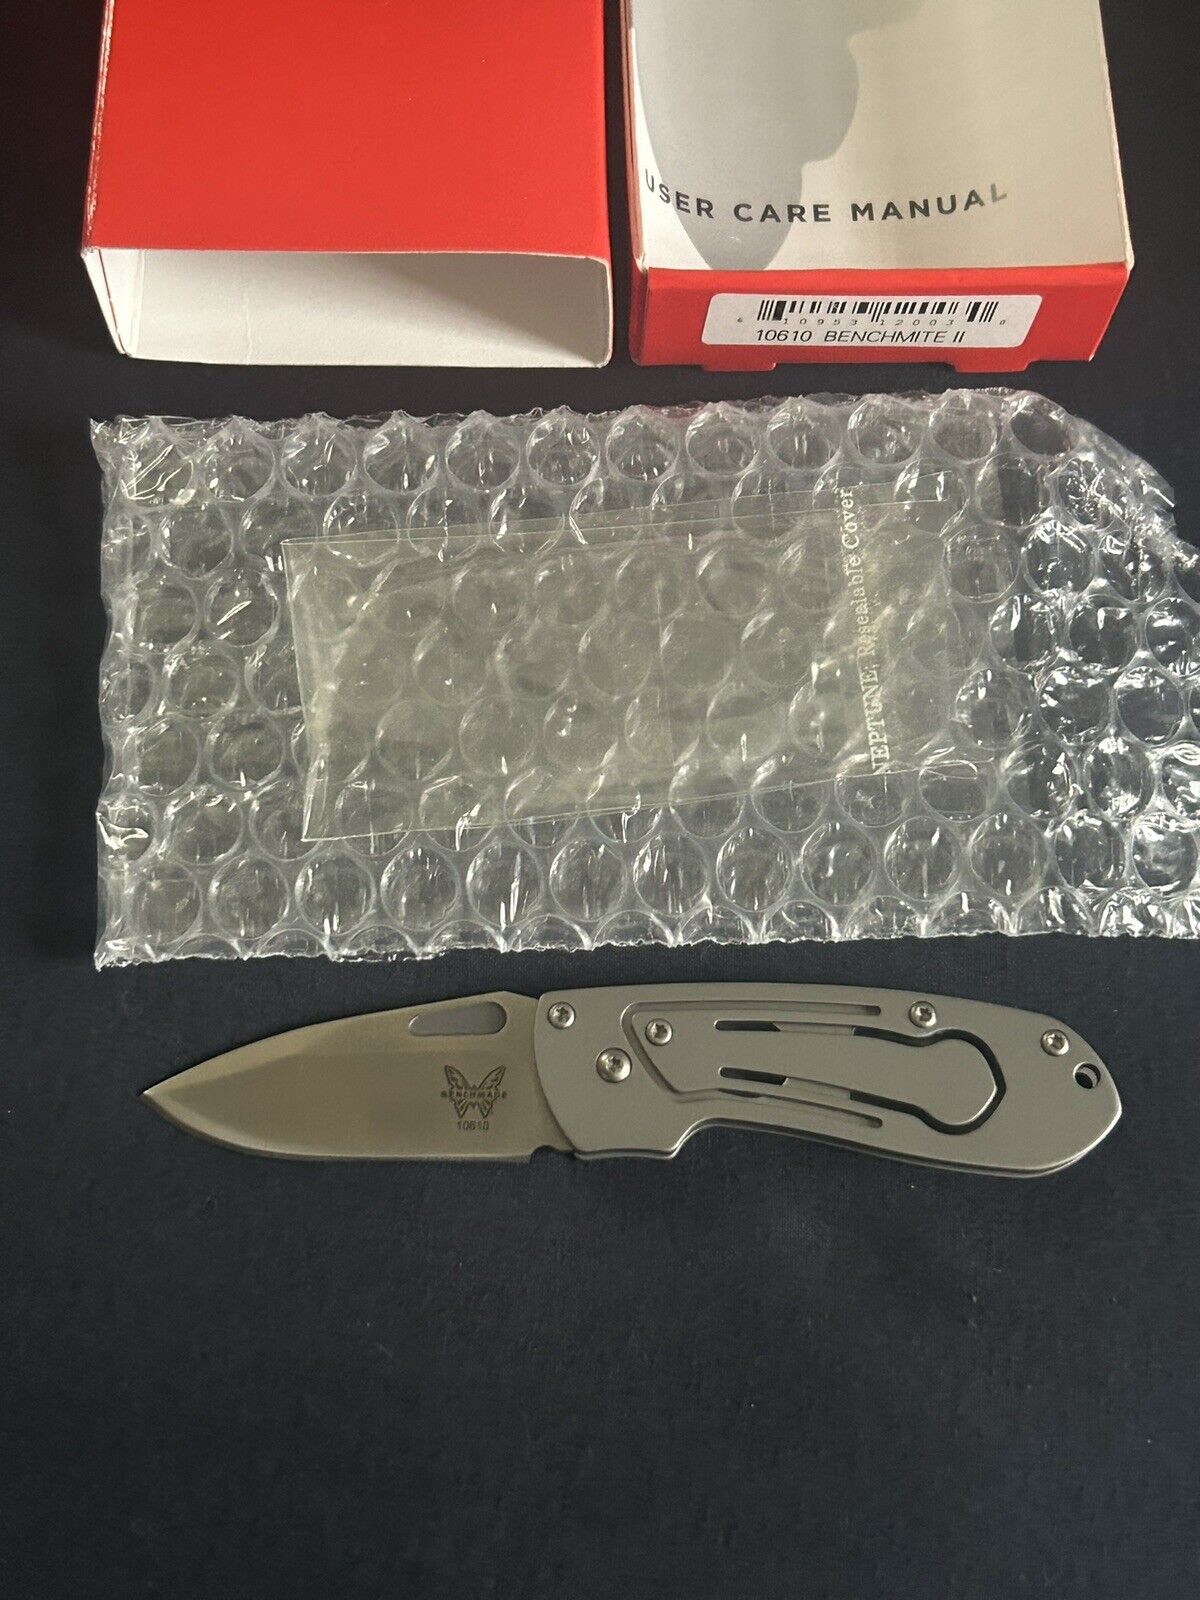 Benchmade BenchMite II Silver - 10610 - Discontinued, Rare, New in Box